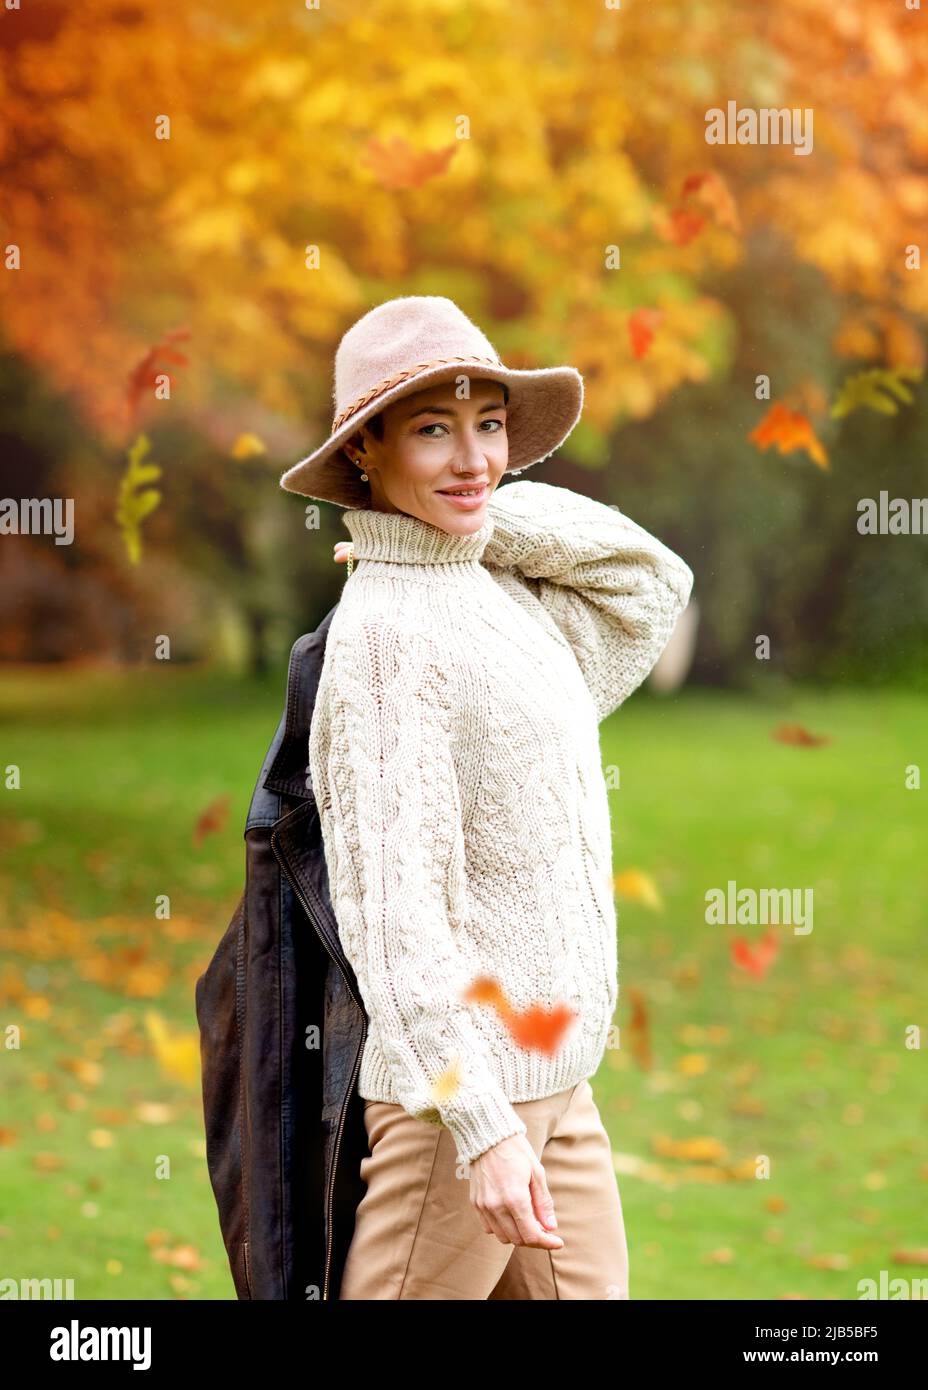 extravagant woman in white sweater and hat walking in autumn park Stock Photo